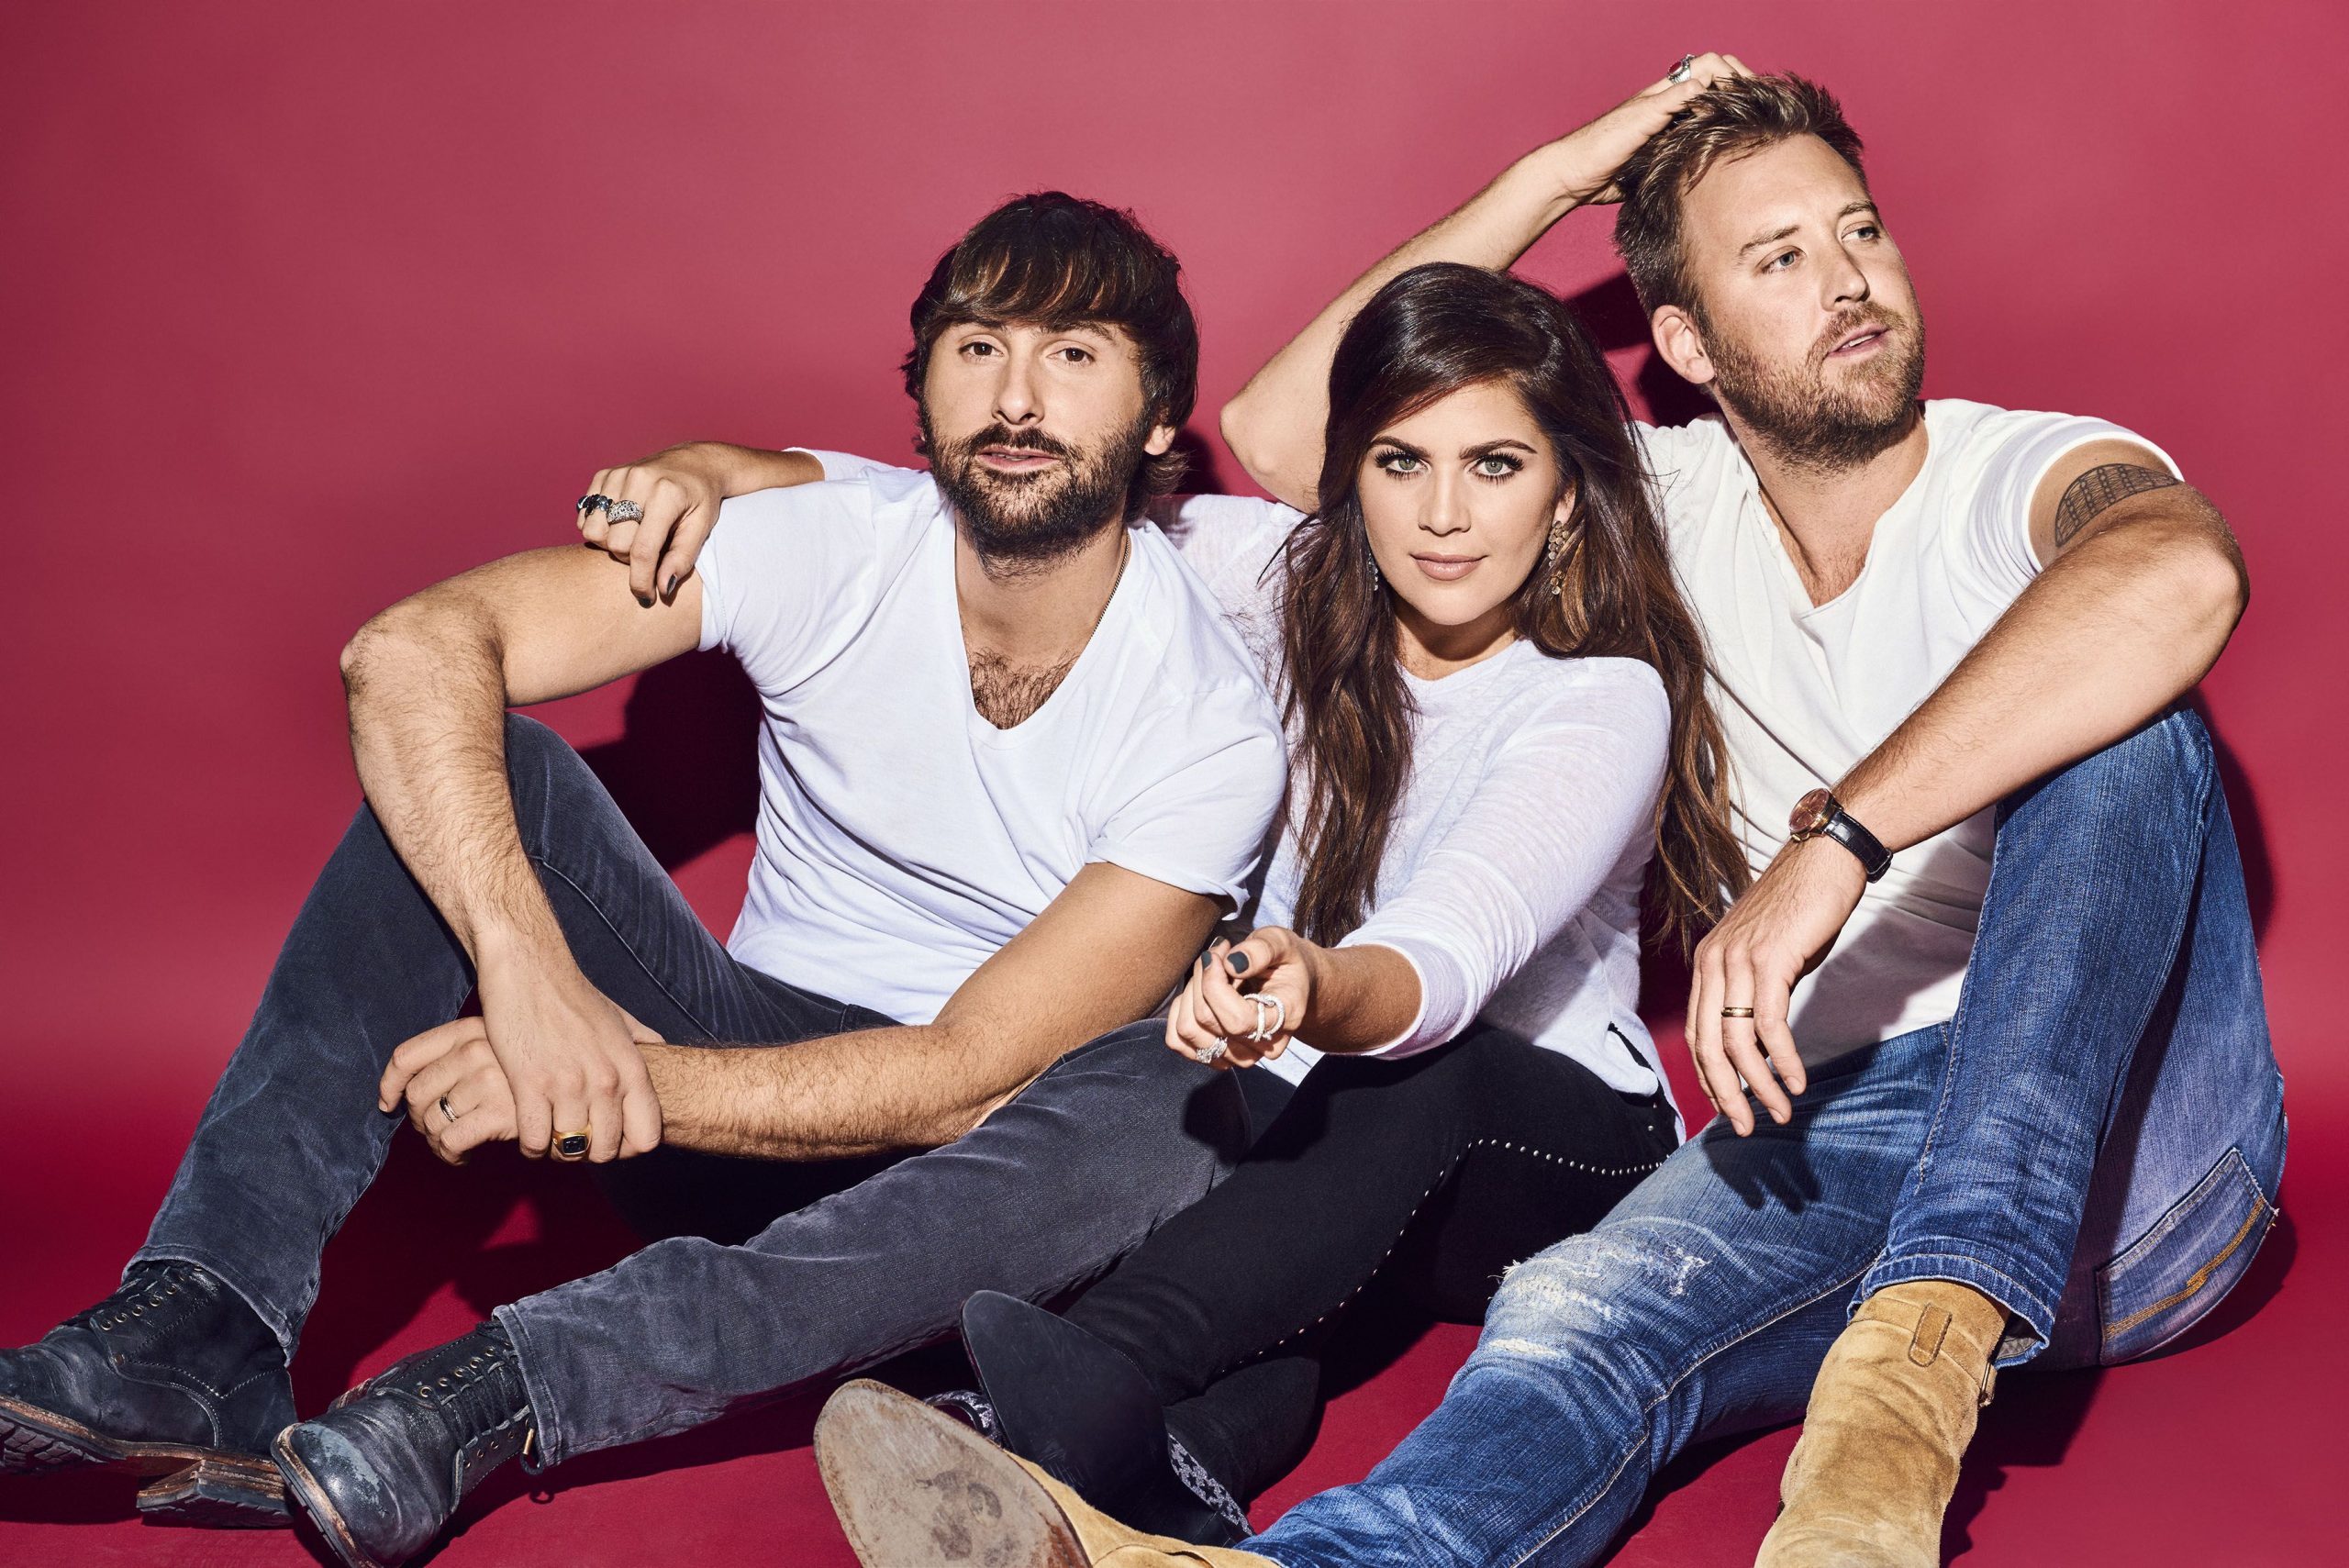 LADY ANTEBELLUM BRINGS MUSIC VIDEO  FOR “SWAGGERING” “YOU LOOK GOOD”  TO CMT HOT 20 COUNTDOWN TOMORROW